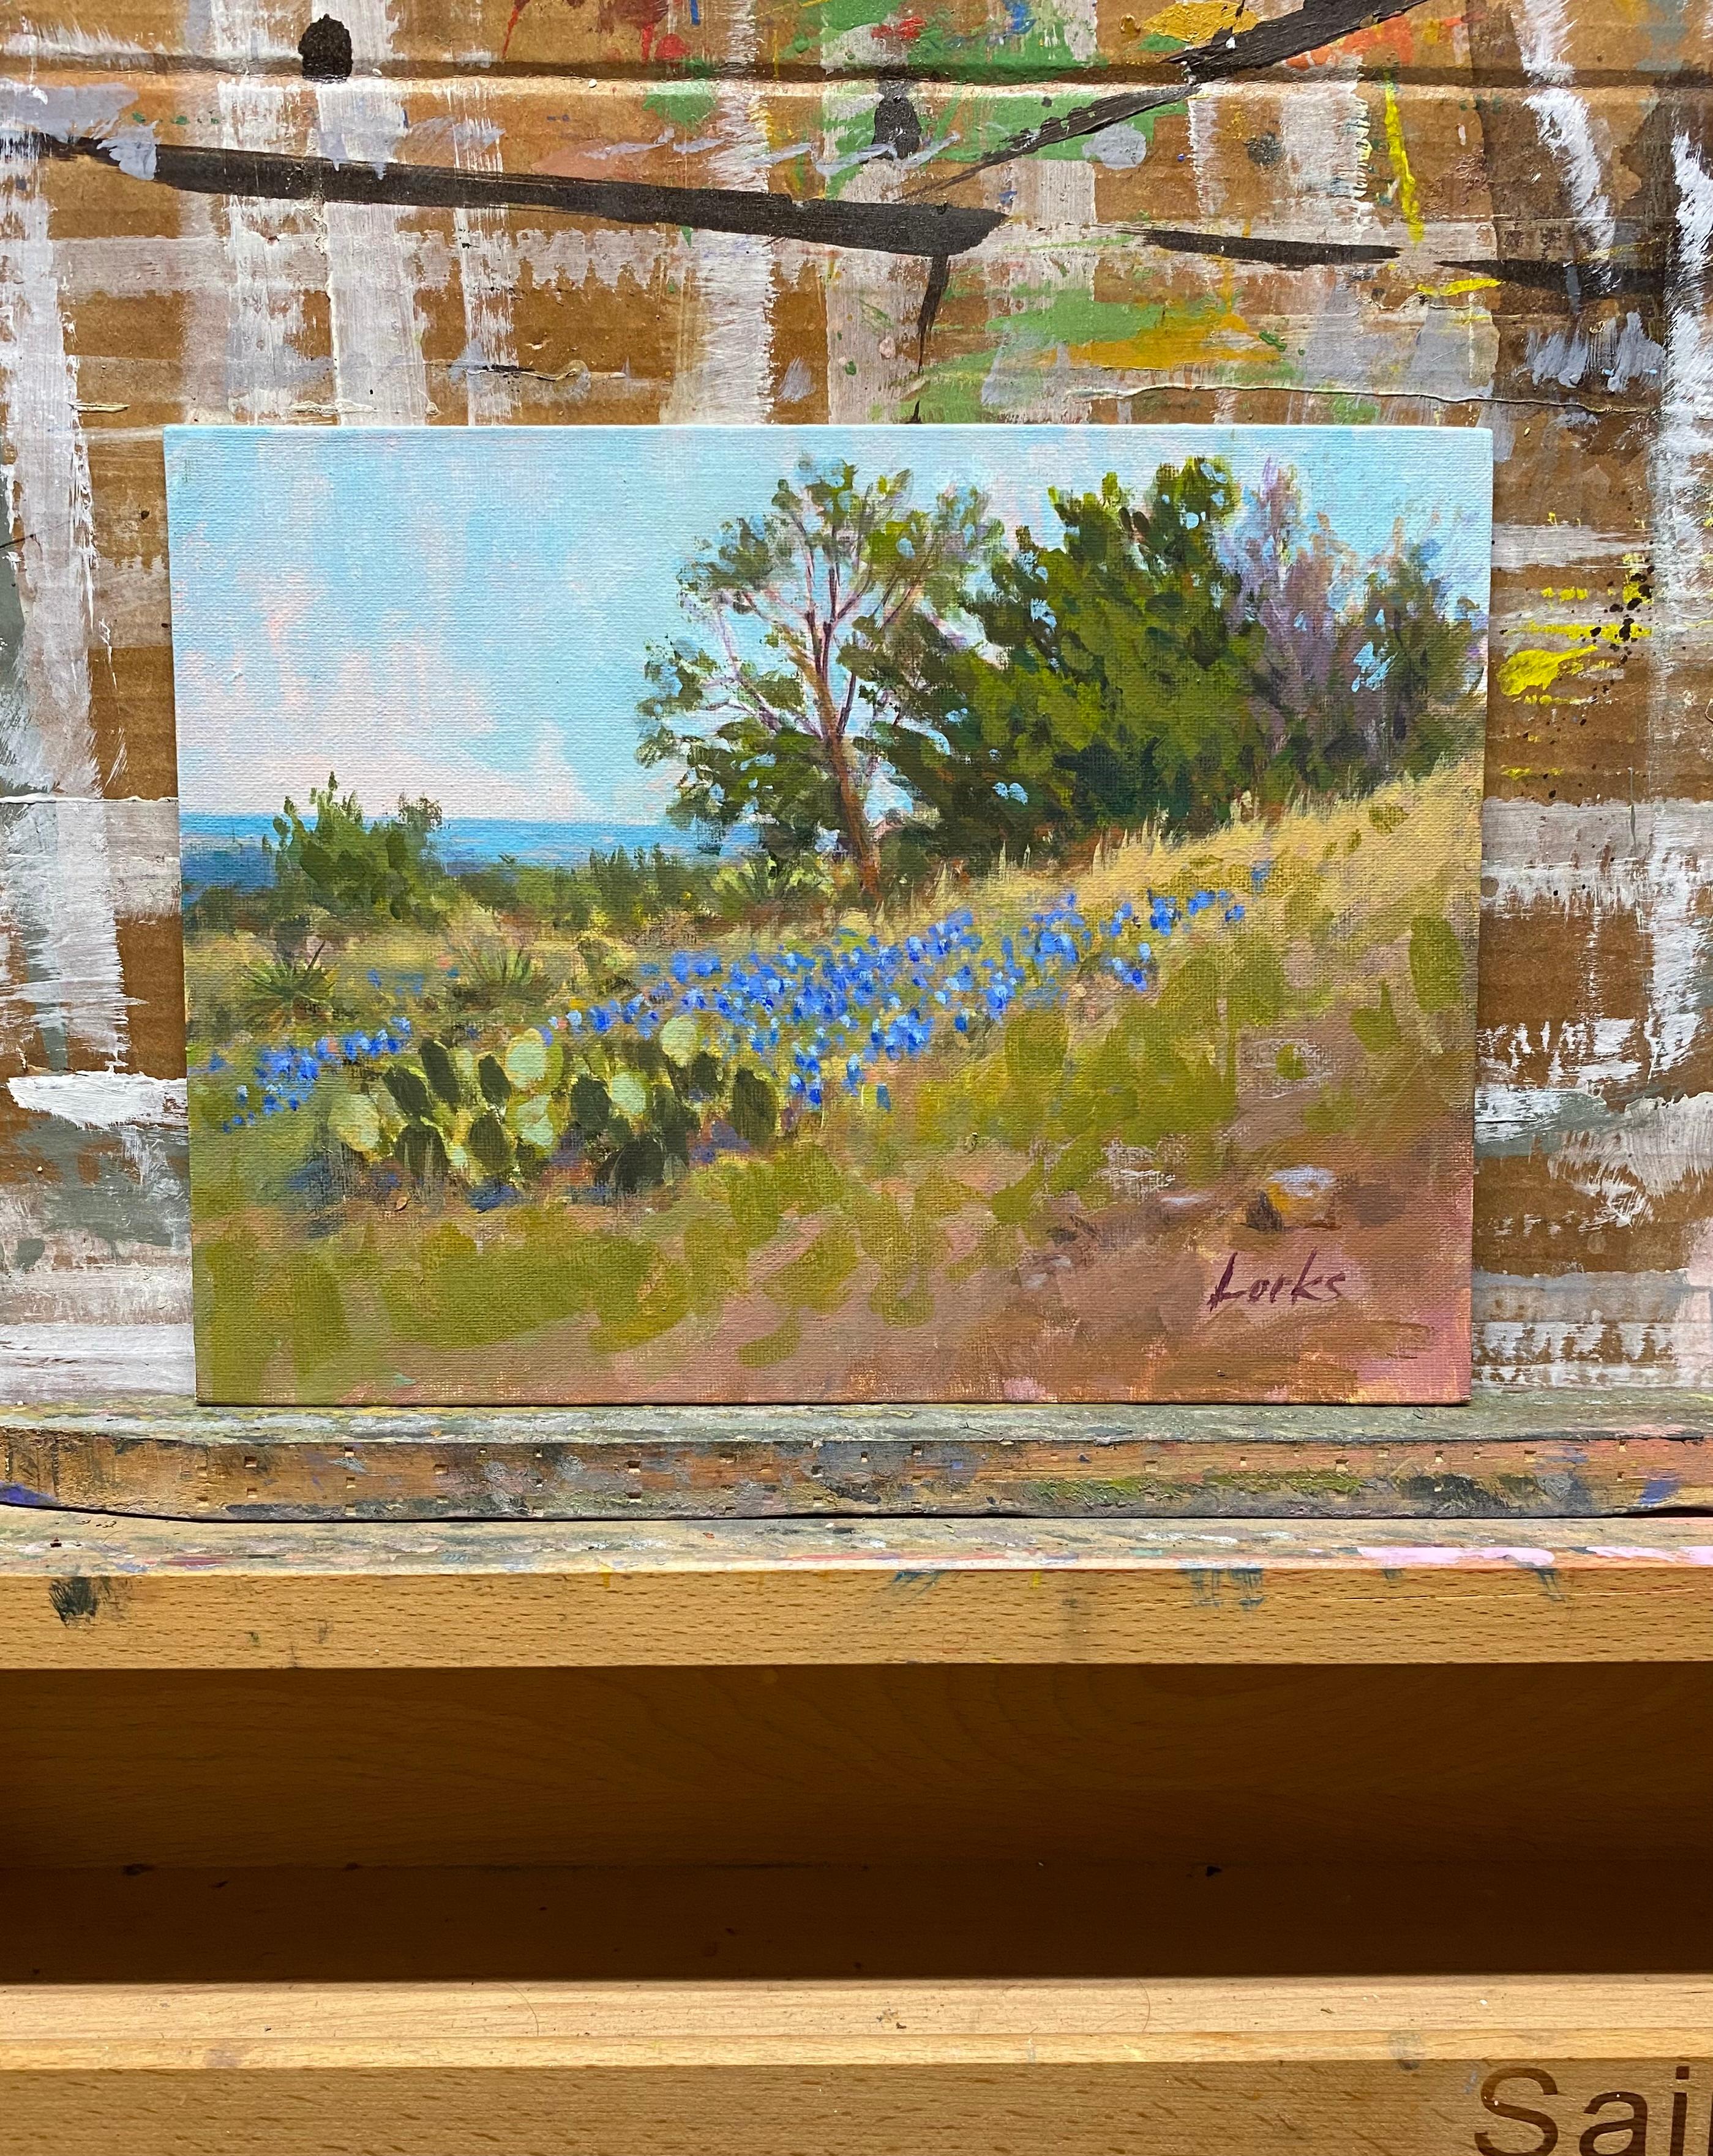 <p>Artist Comments<br />Cedar trees, bluebonnets, and cacti grace a hilltop near Willow City, Texas. A body of water peeks through the edge of the grass-covered ground. The painterly impressionist depiction of the landscape evokes a serene and